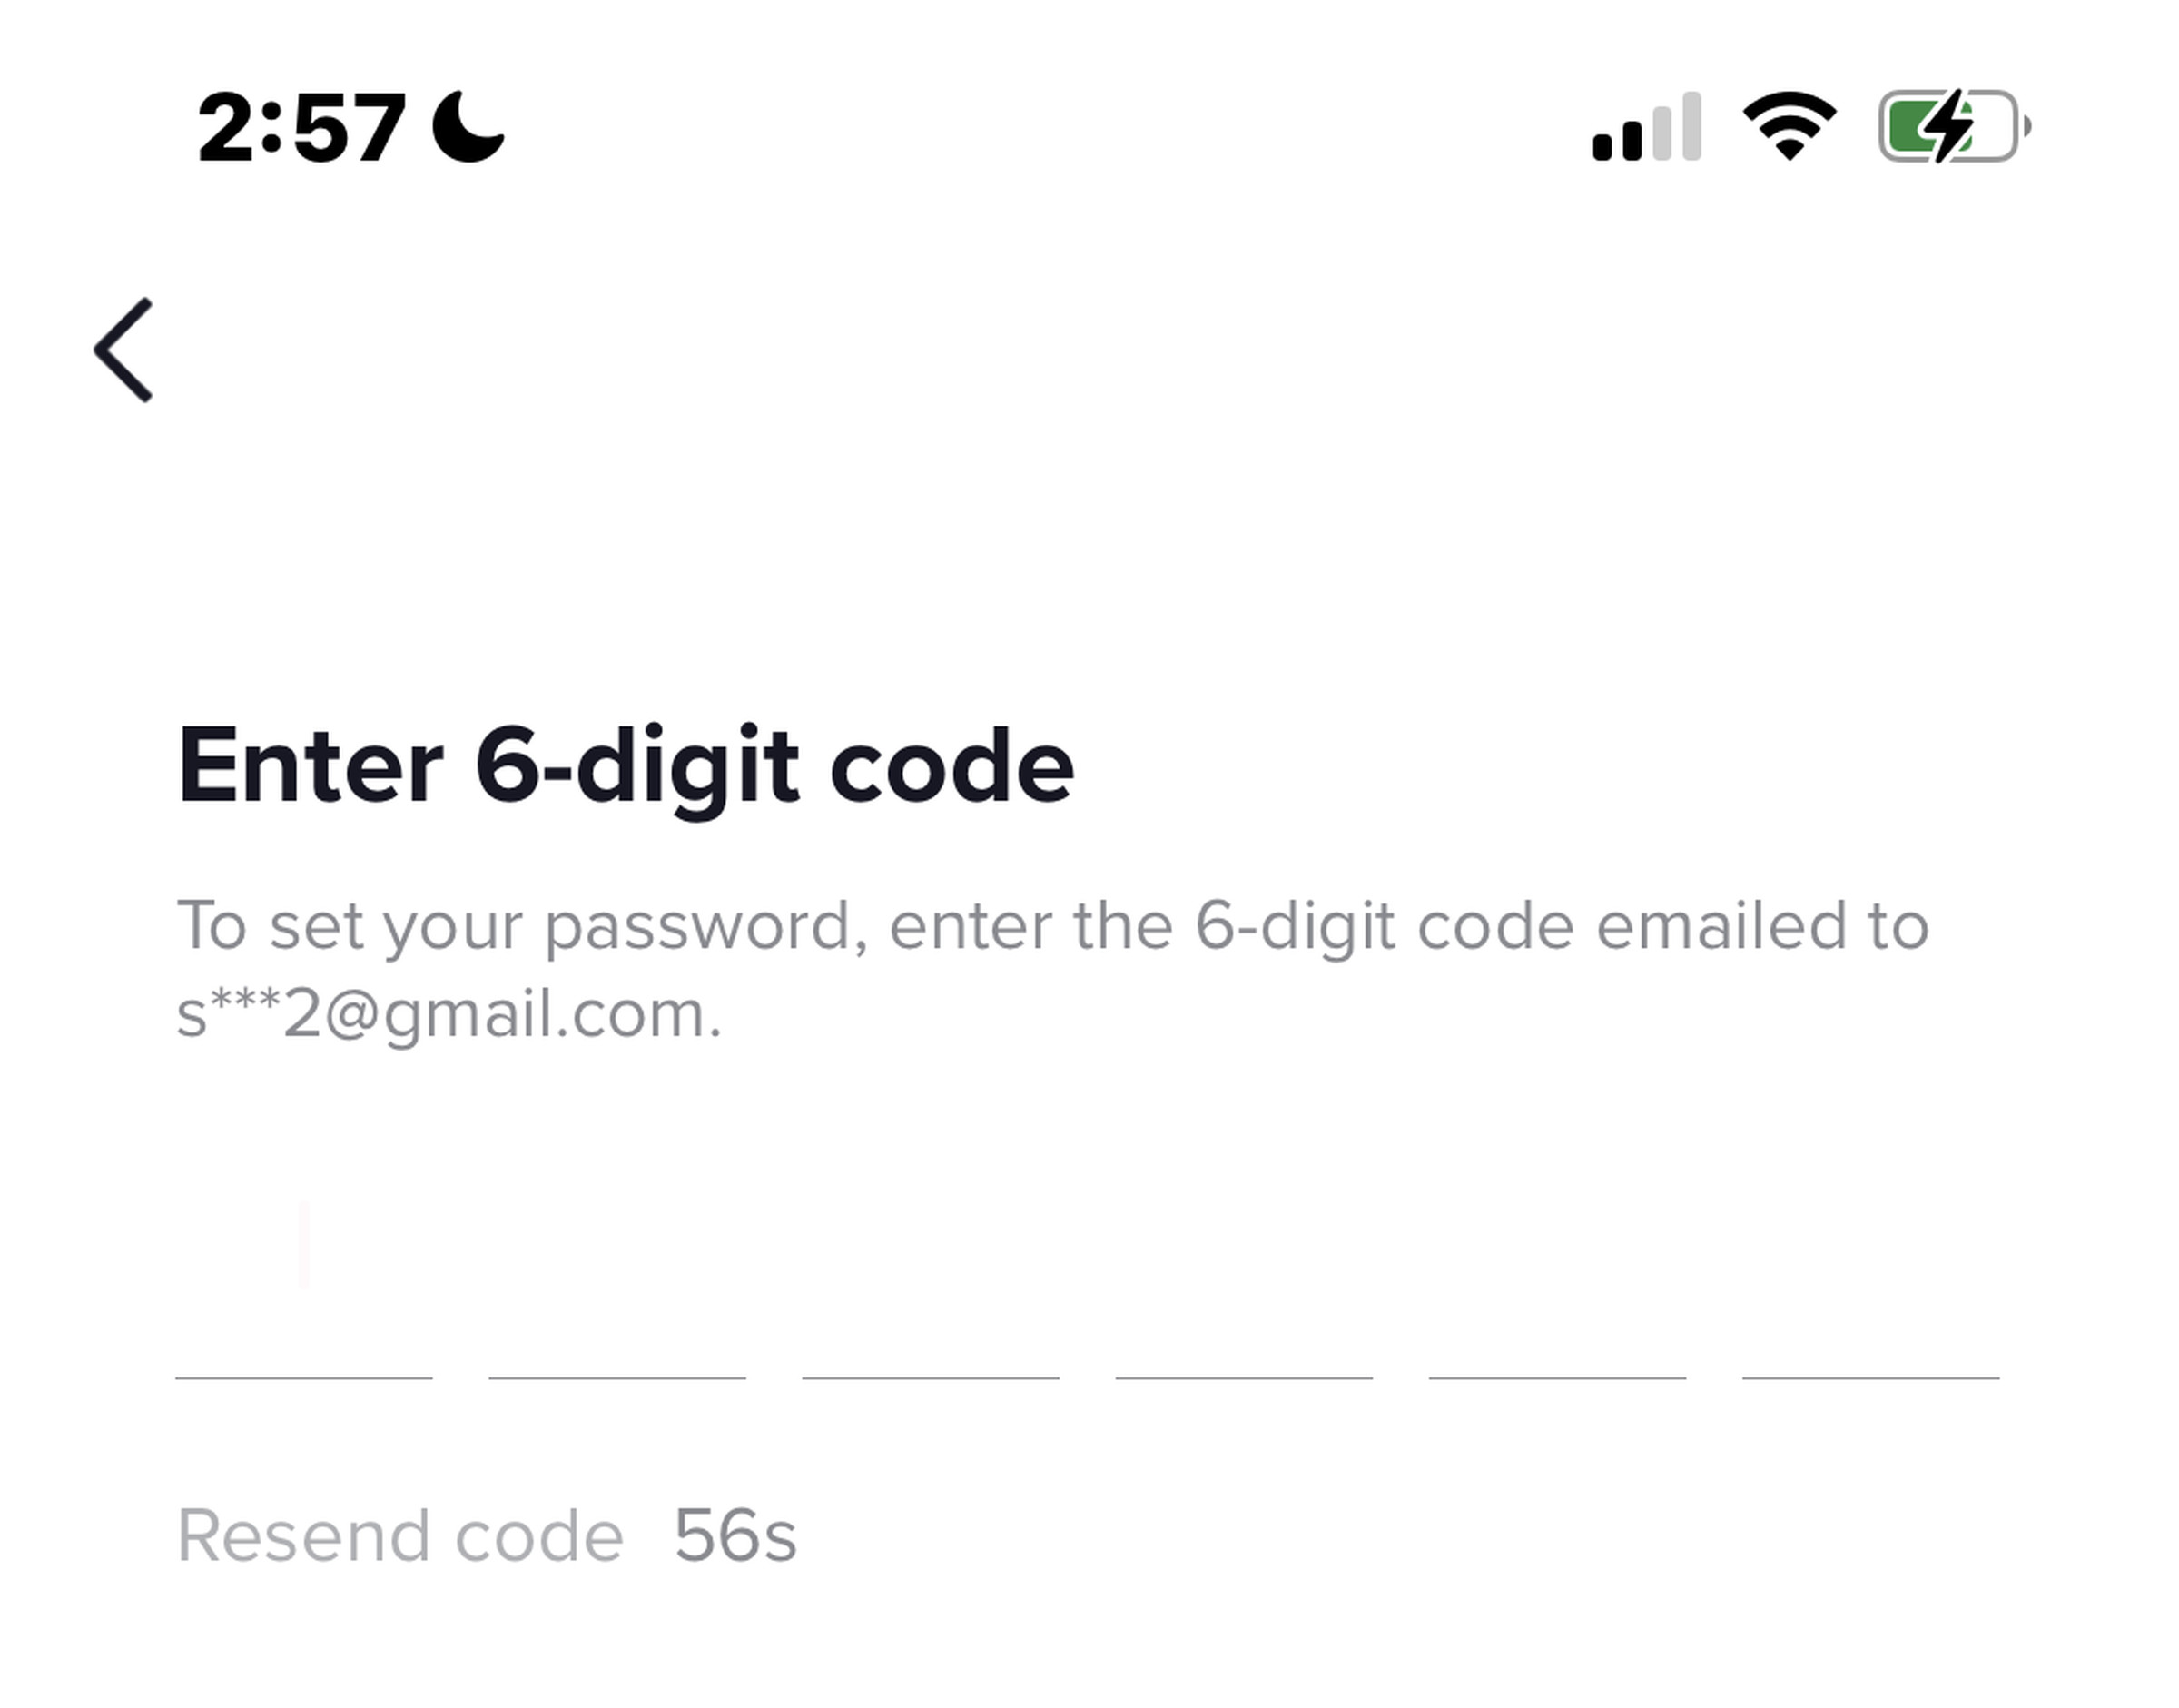 A Tiktok account recovery screen inviting the user to enter a six-digit code.